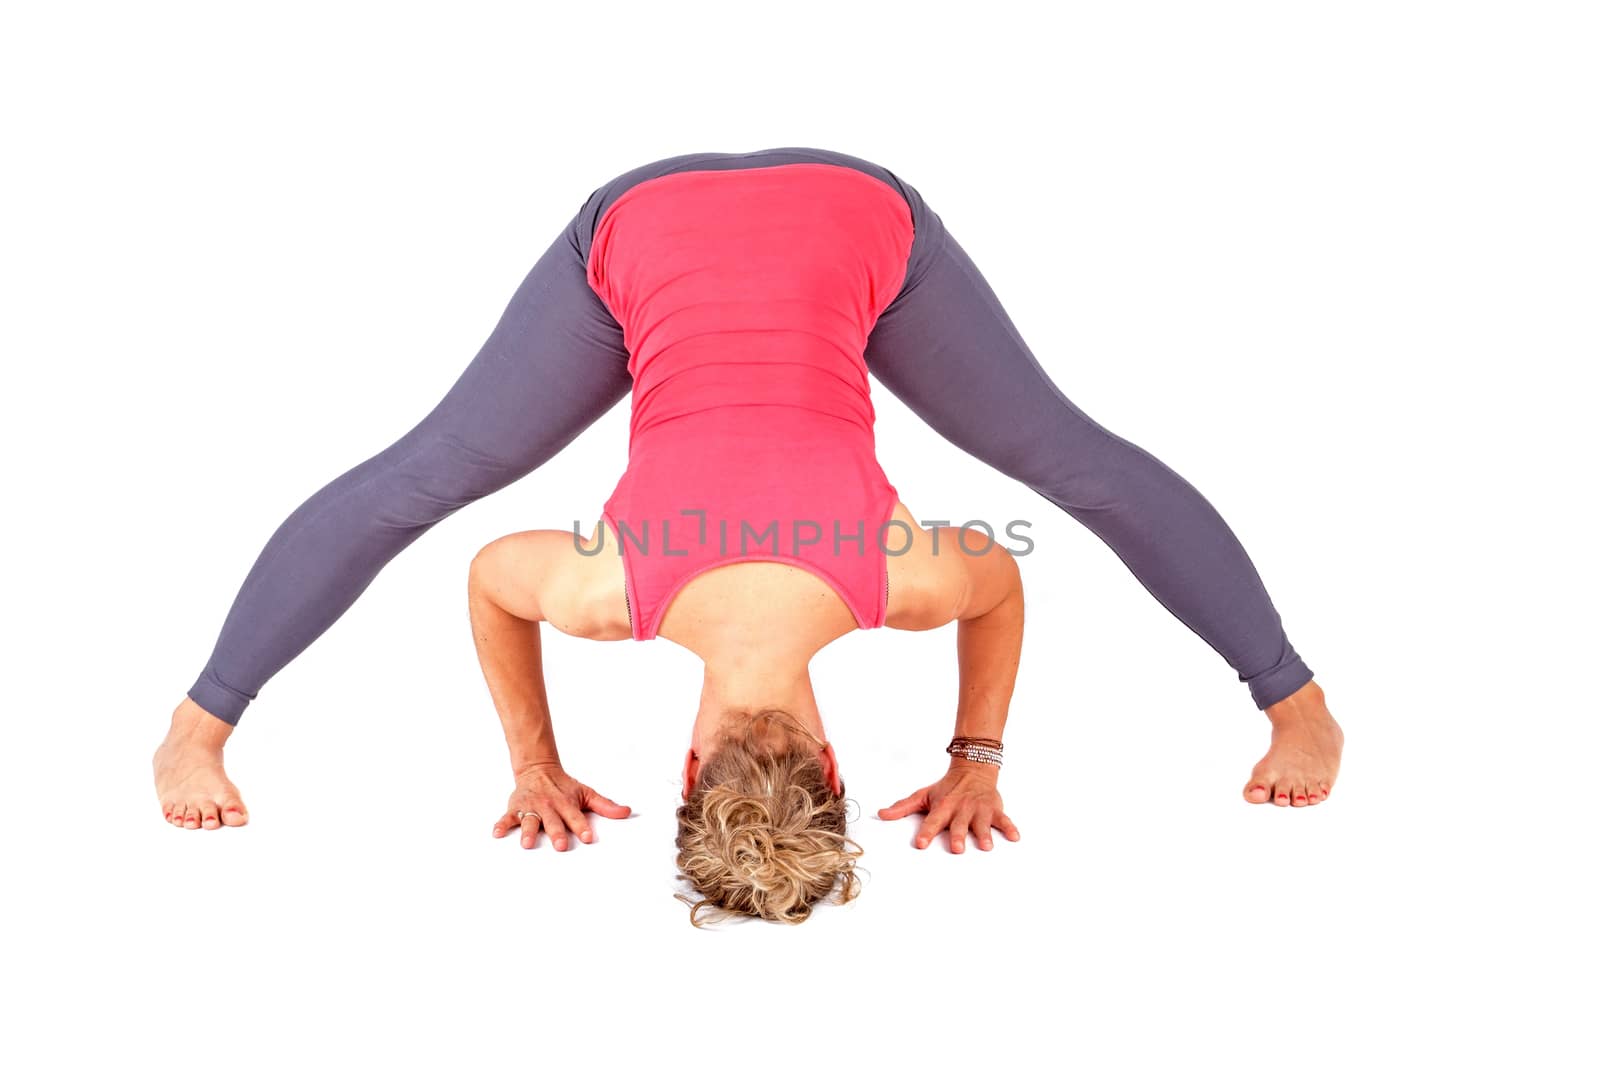 Young woman making a yoga posture on a white background